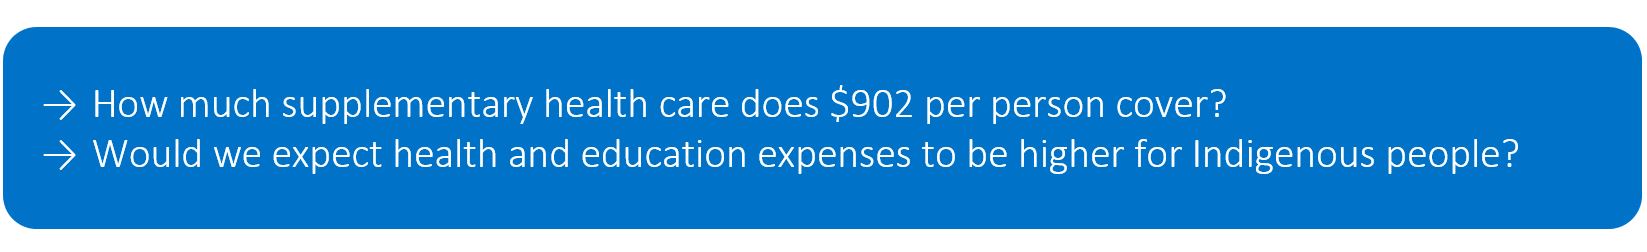 How much supplementary health care does $902 per person cover? Would we expect health and education expenses to be higher for Indigenous people?